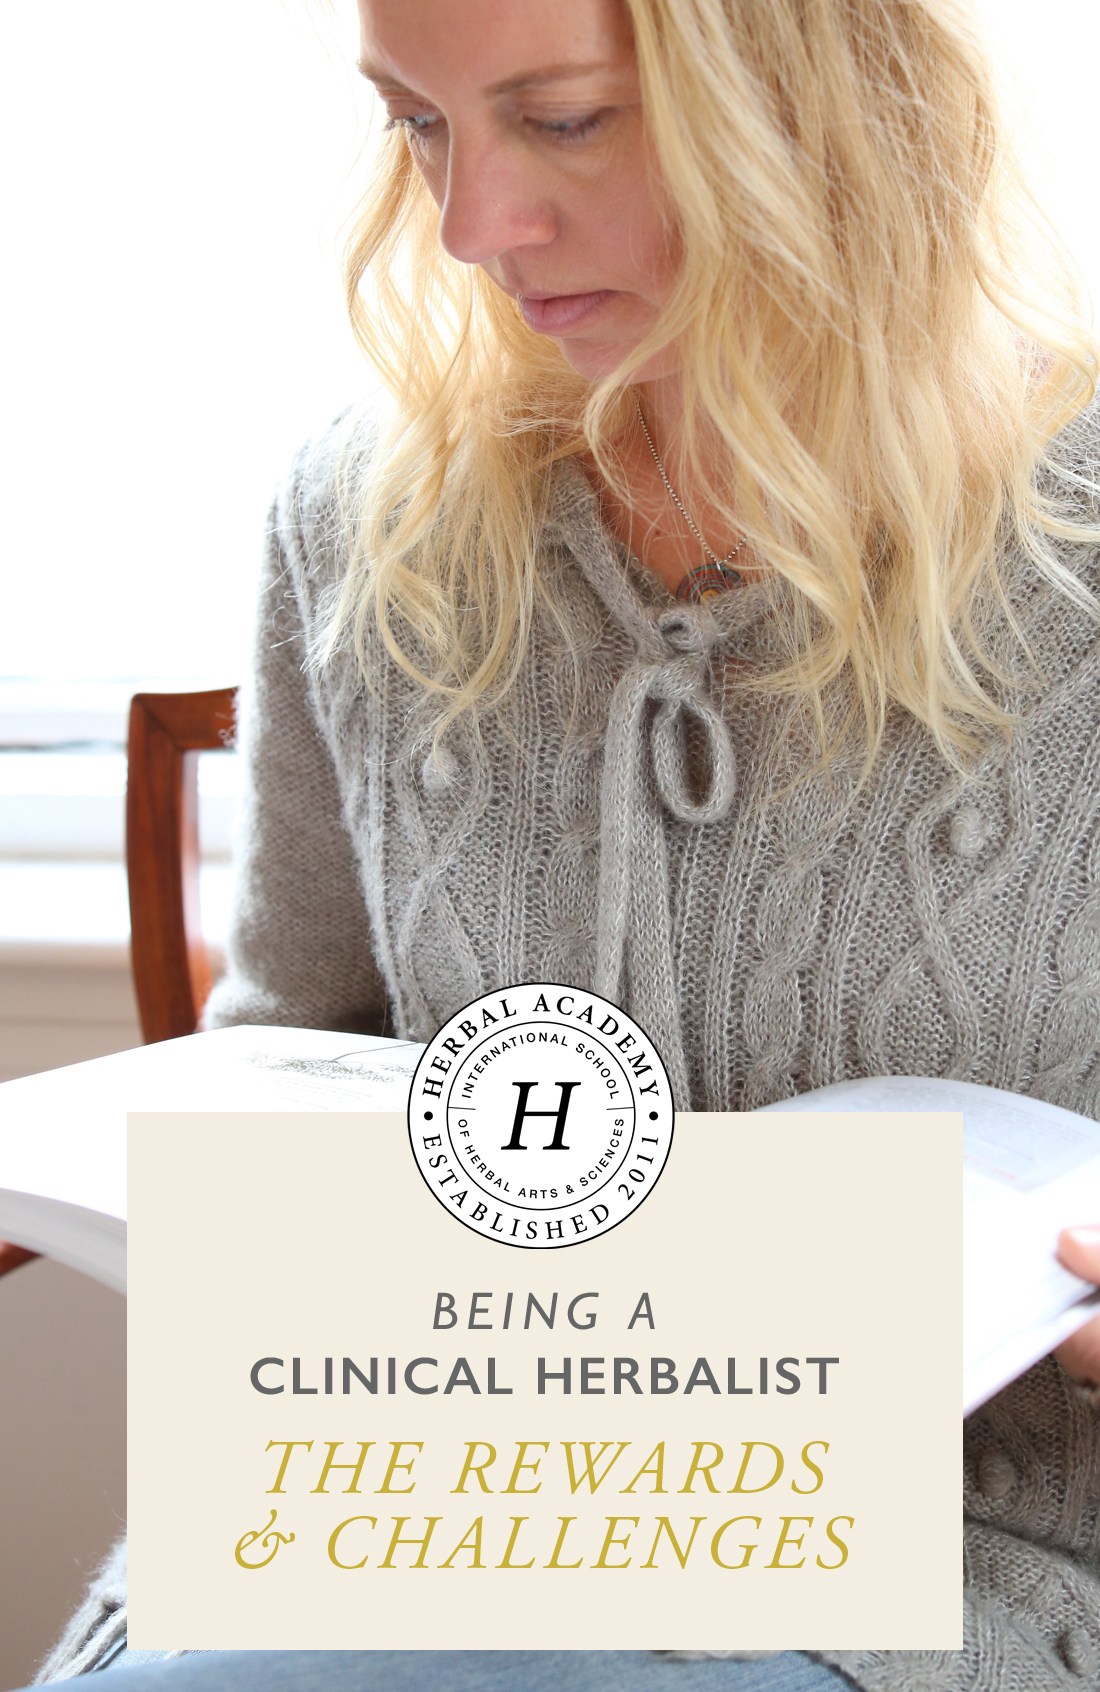 The Rewards and Challenges of Being a Clinical Herbalist | Herbal Academy | Learn the rewards (and challenges) of working as a clinical herbalist.